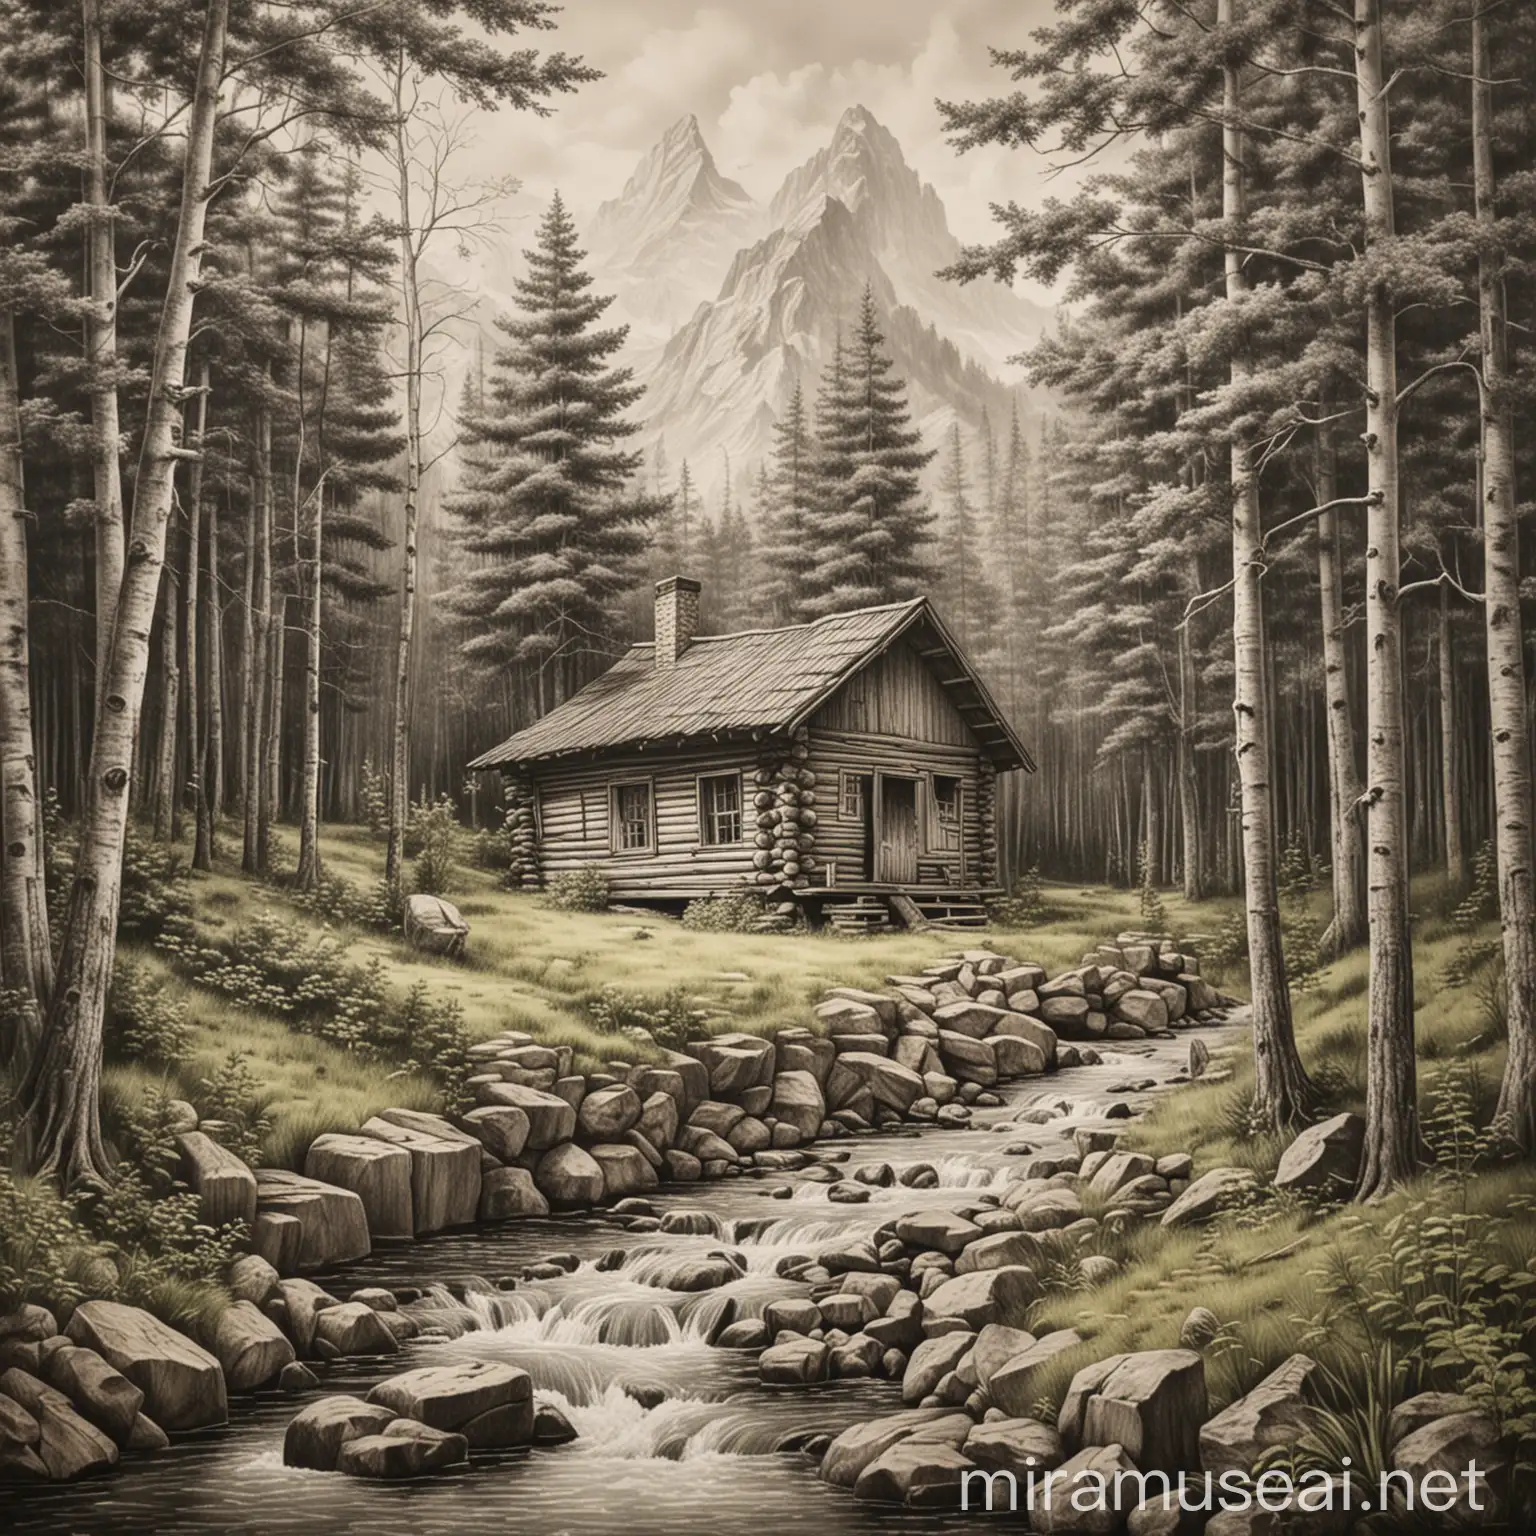 Pencil Drawing of a Cozy Cabin in the Forest